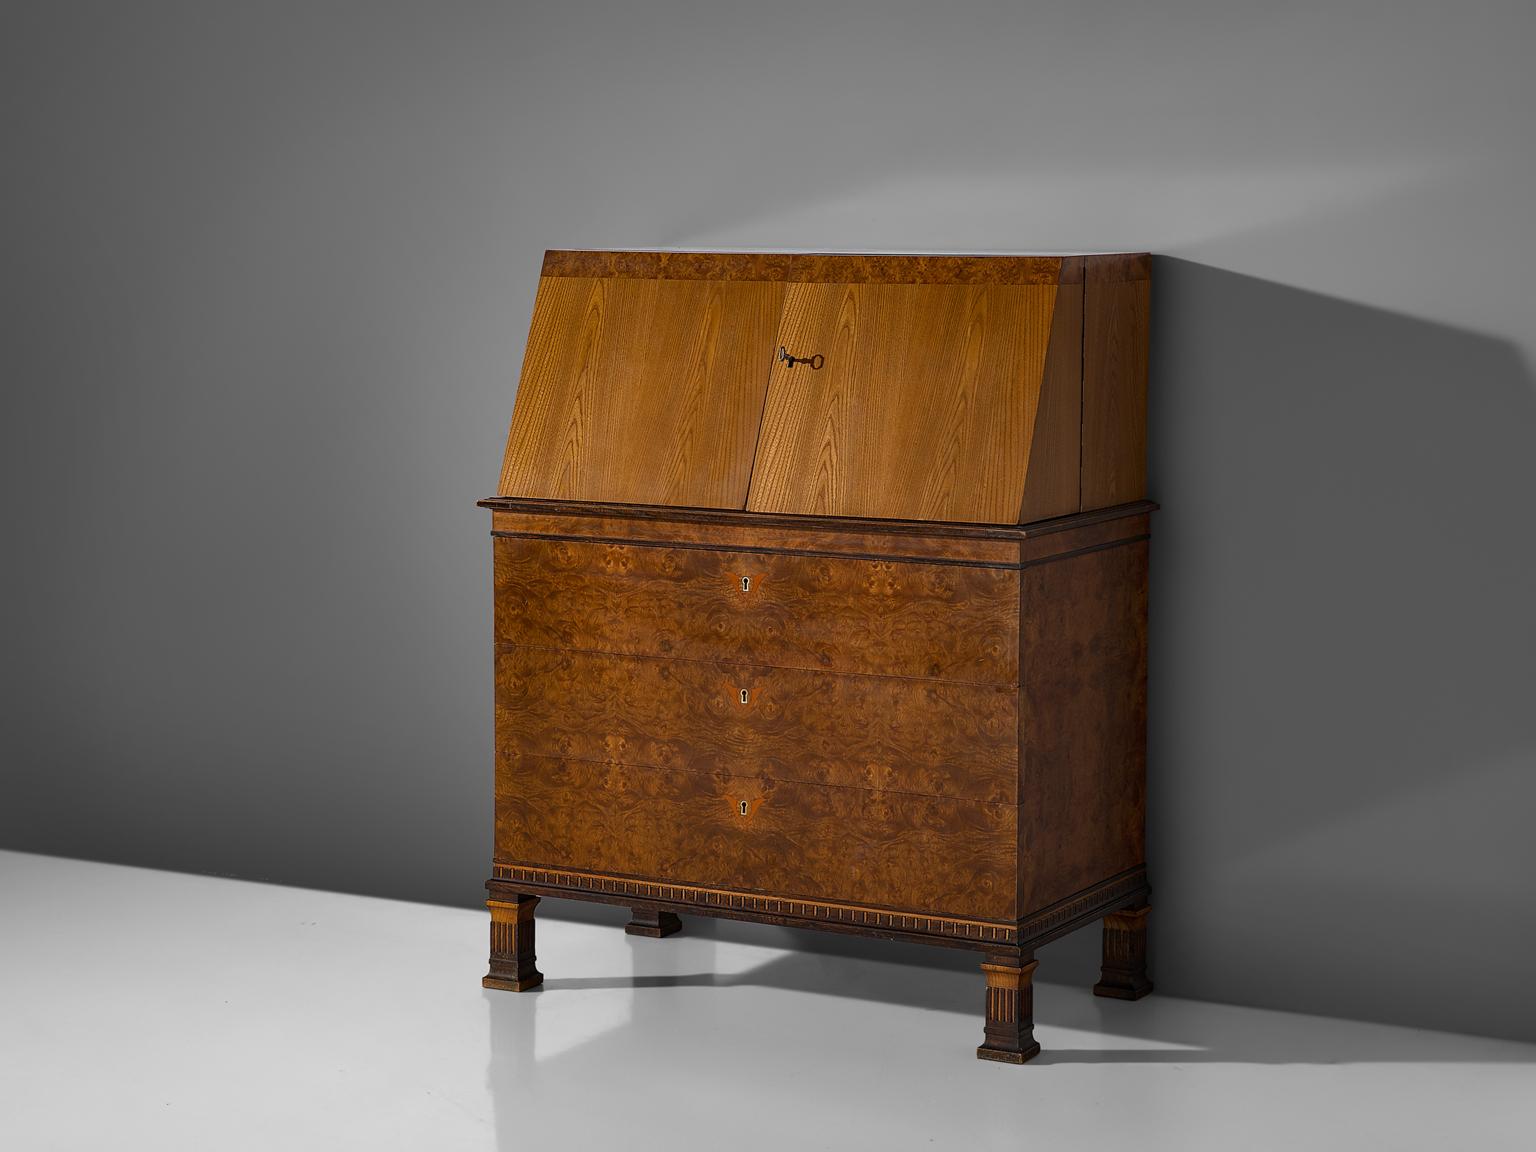 Erik Chambert for Chamberts Möbelfabrik, secretary, inlayed birch, elm and rosewood, Sweden, 1930s

This Swedish secretary was designed by Erik Chambert during the 1930s. It features a high level of craftsmanship, with a wide variety of different